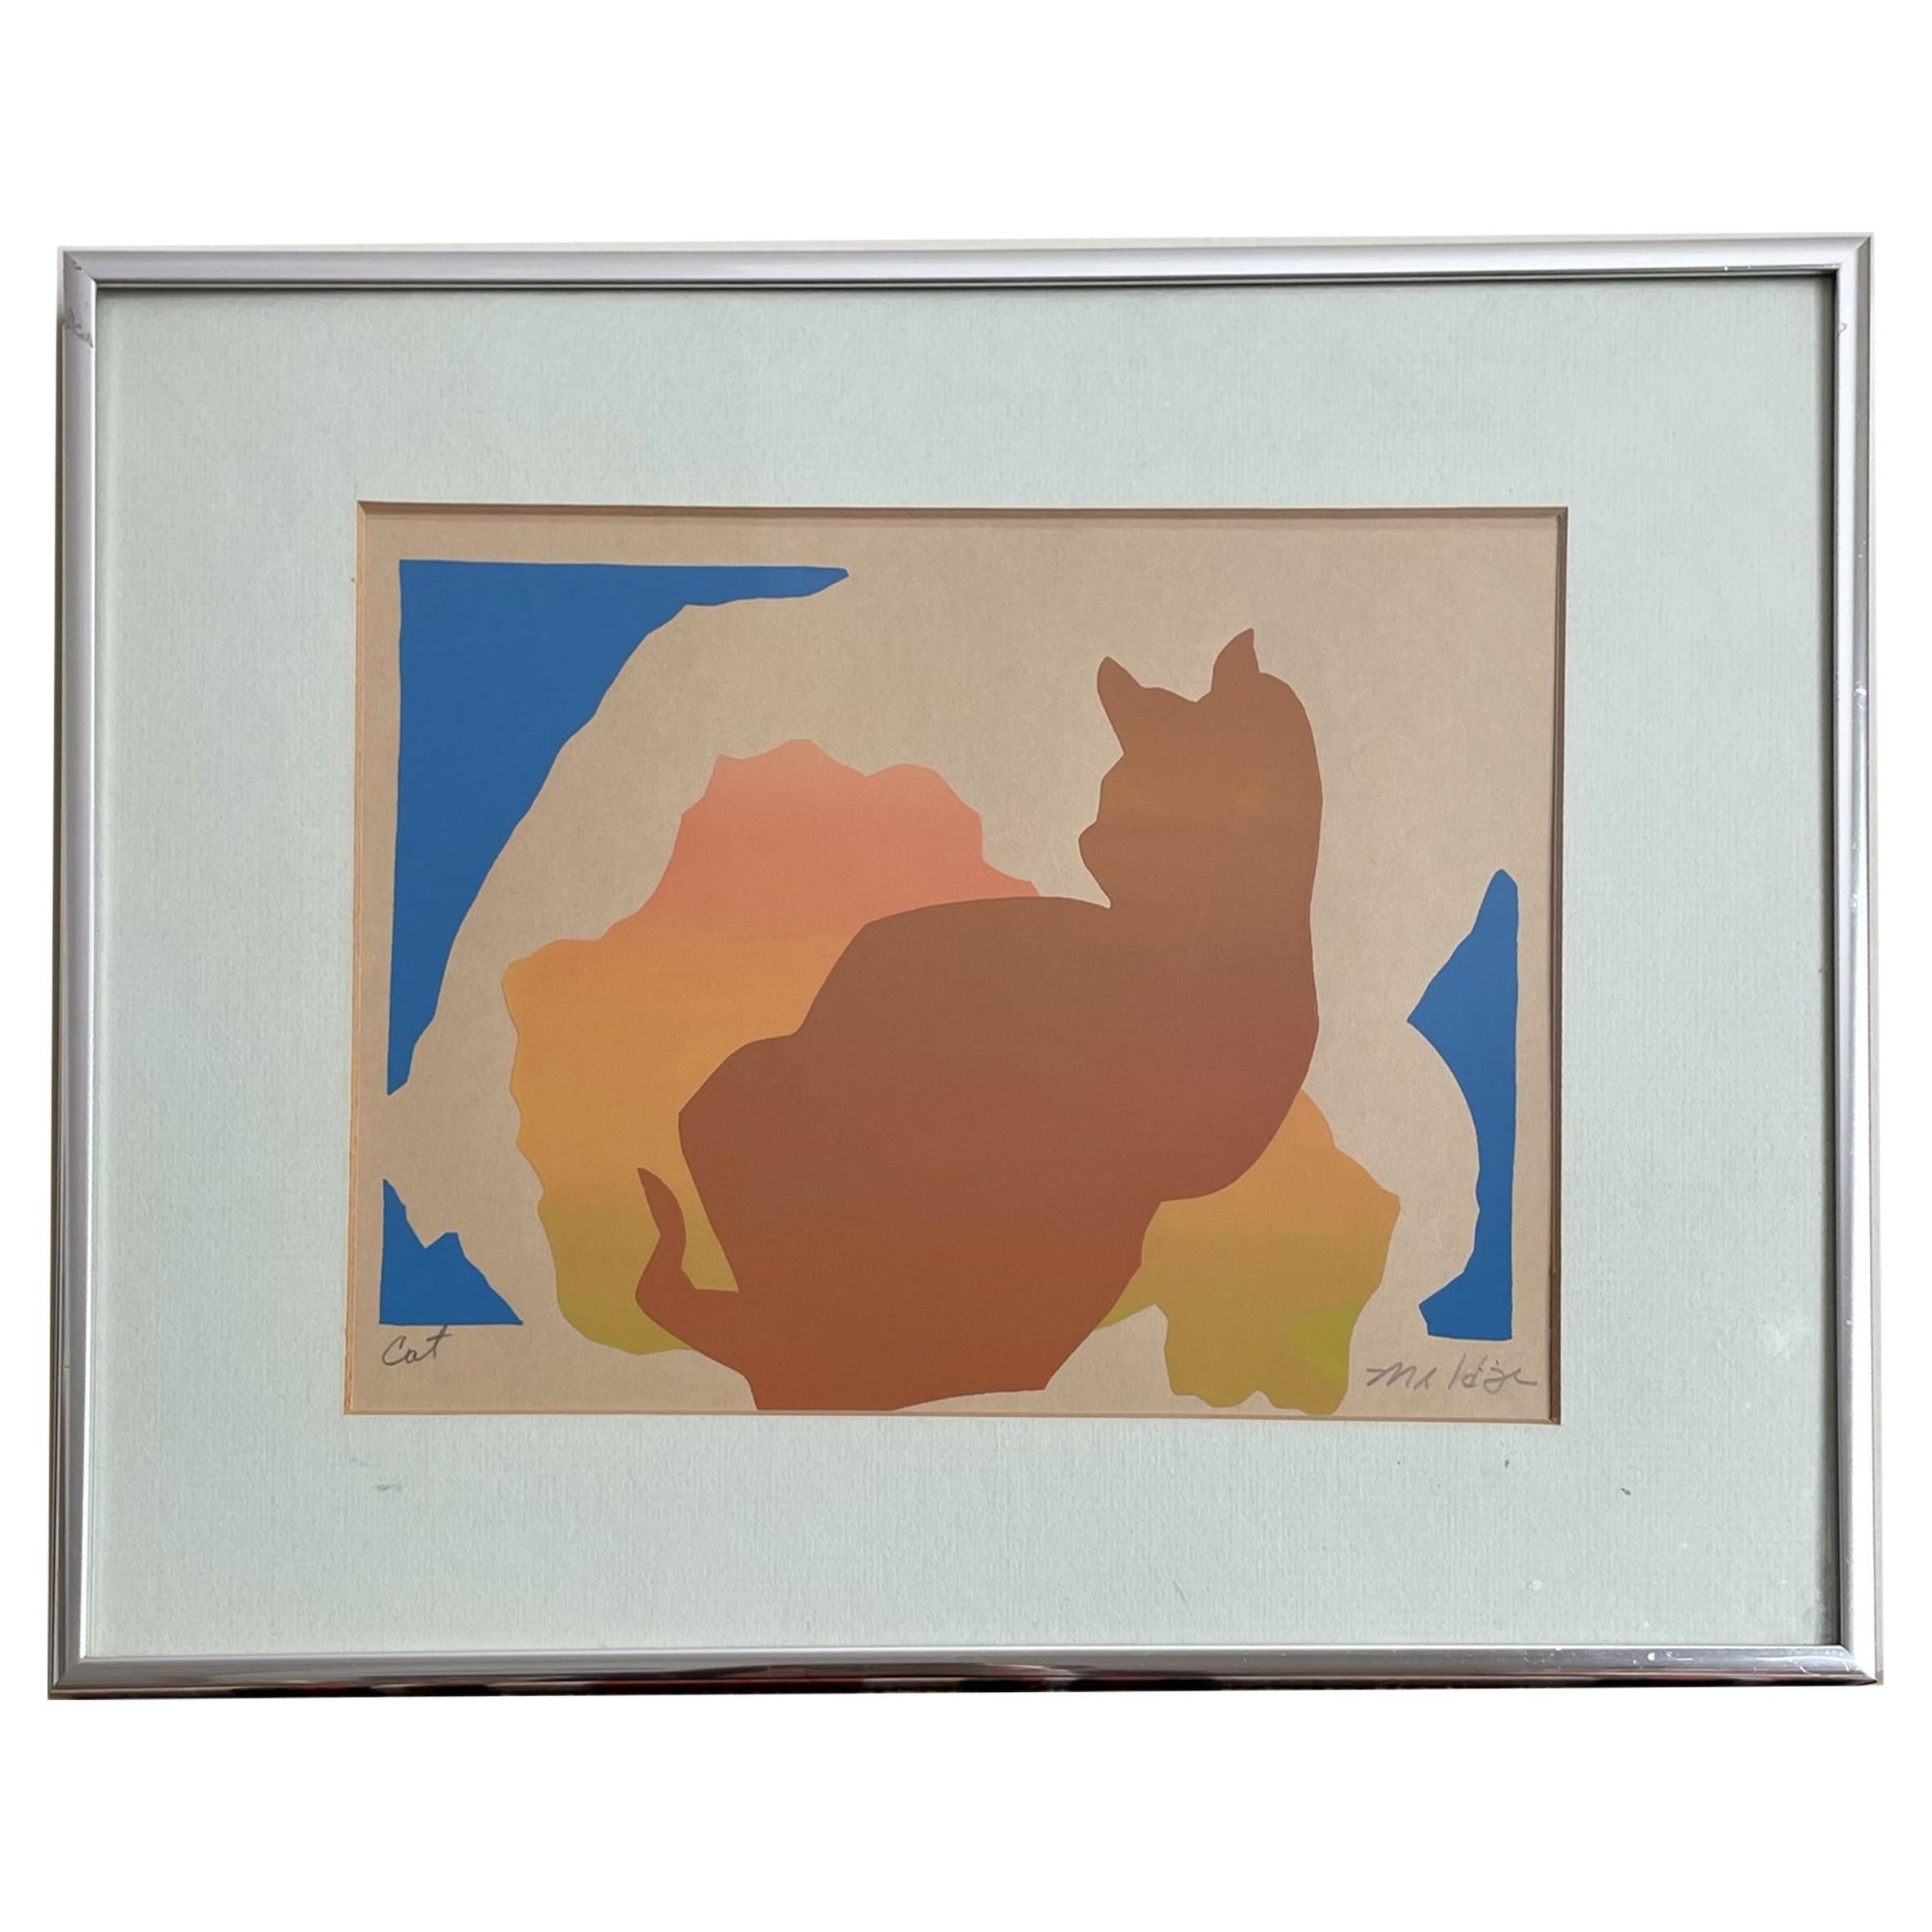 Colorful Cat, Hand Crafted Silk Screen Print, by R L Mulder